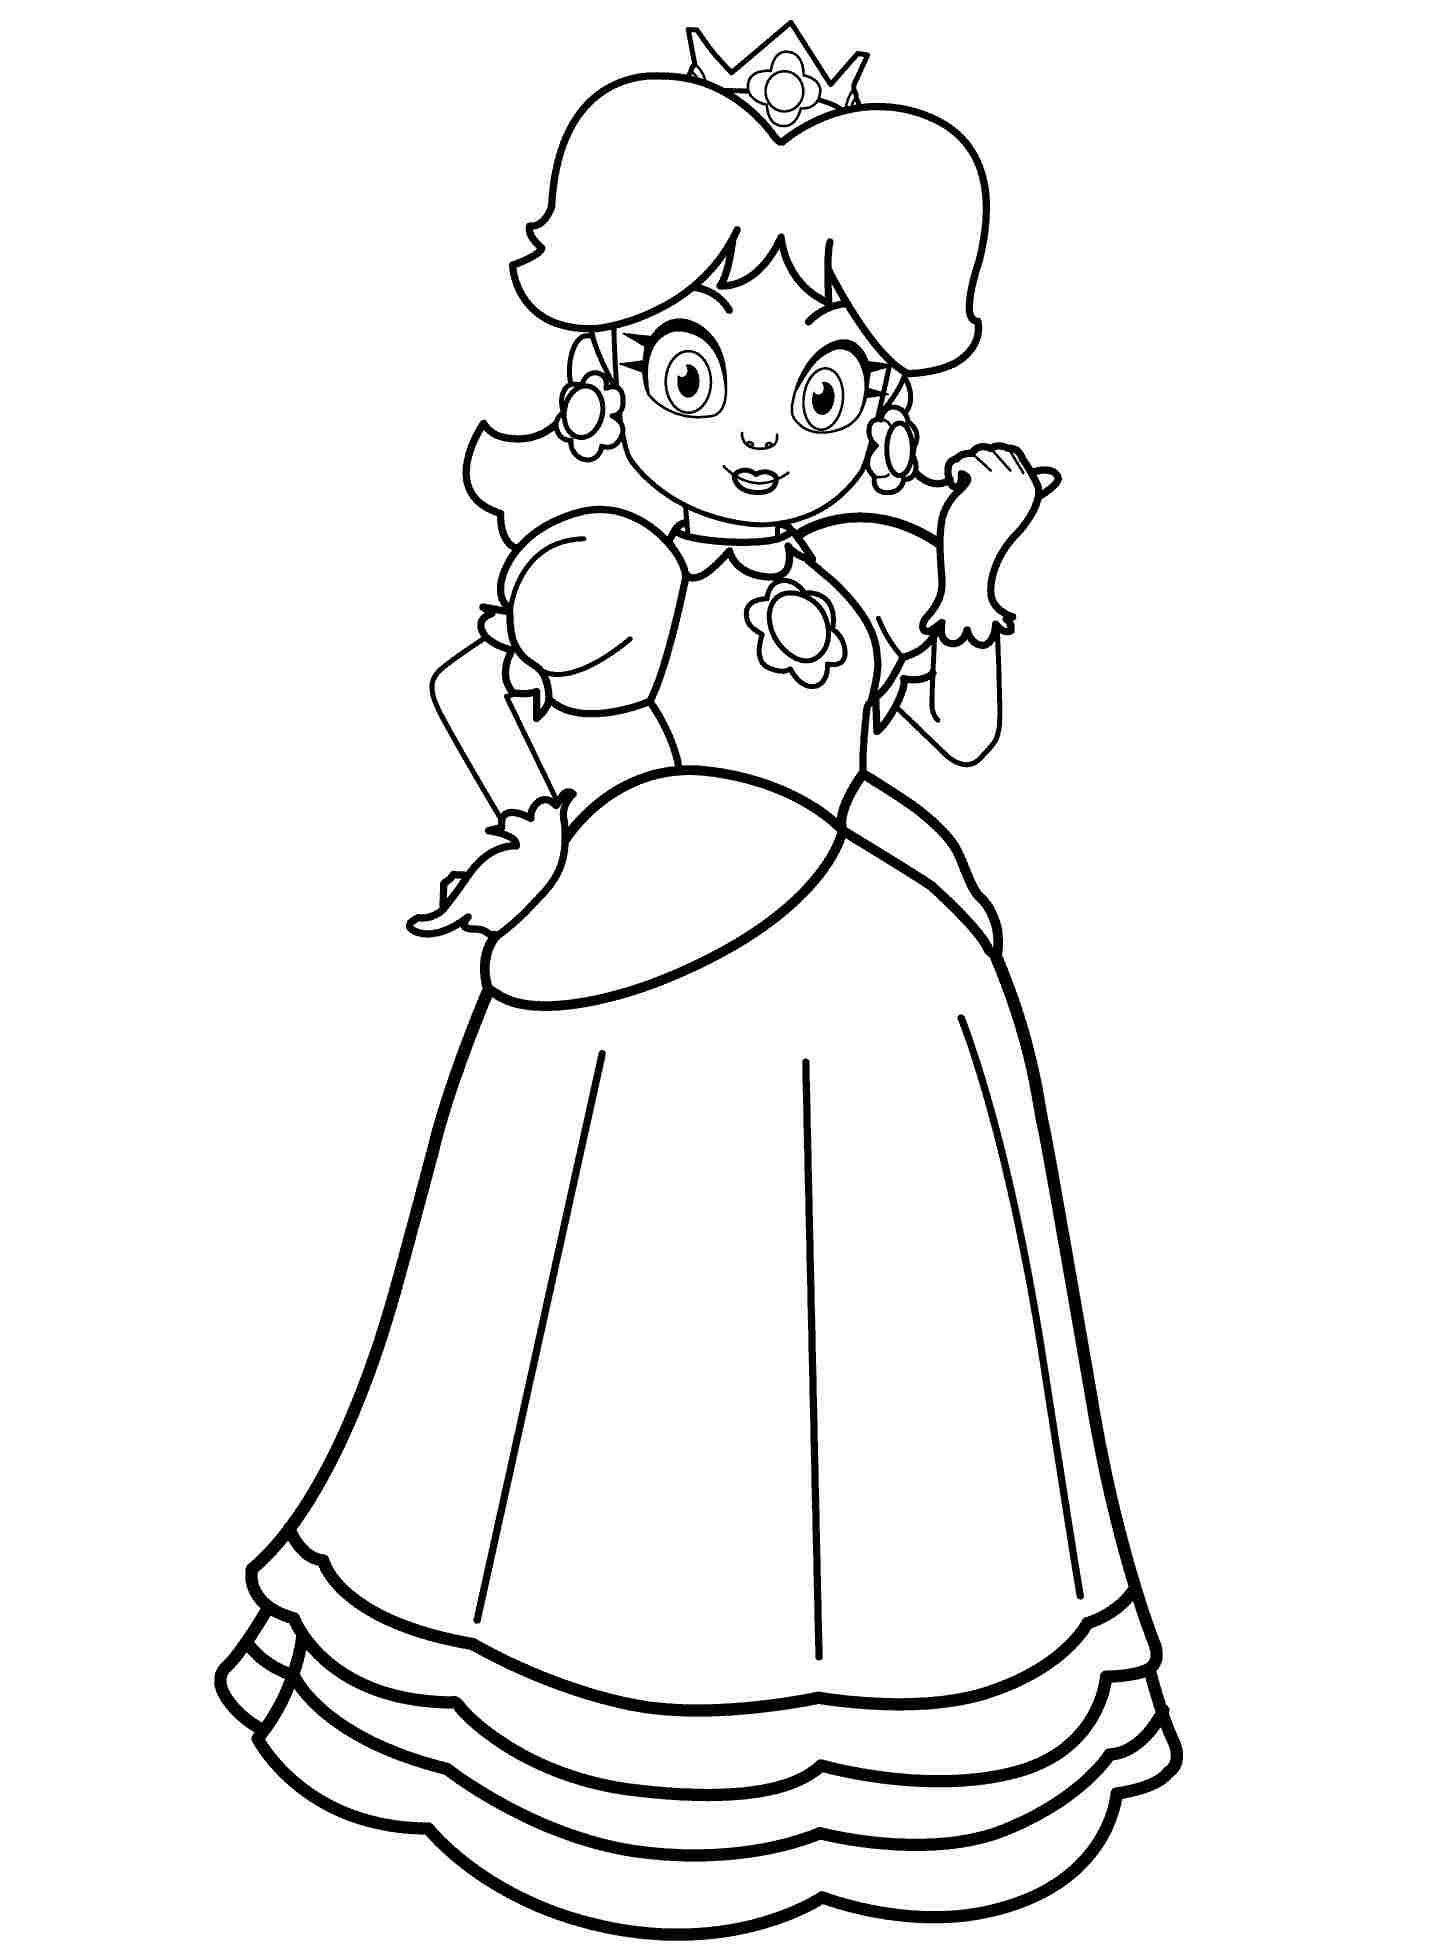 Princess Daisy is pointing something from Princess Daisy